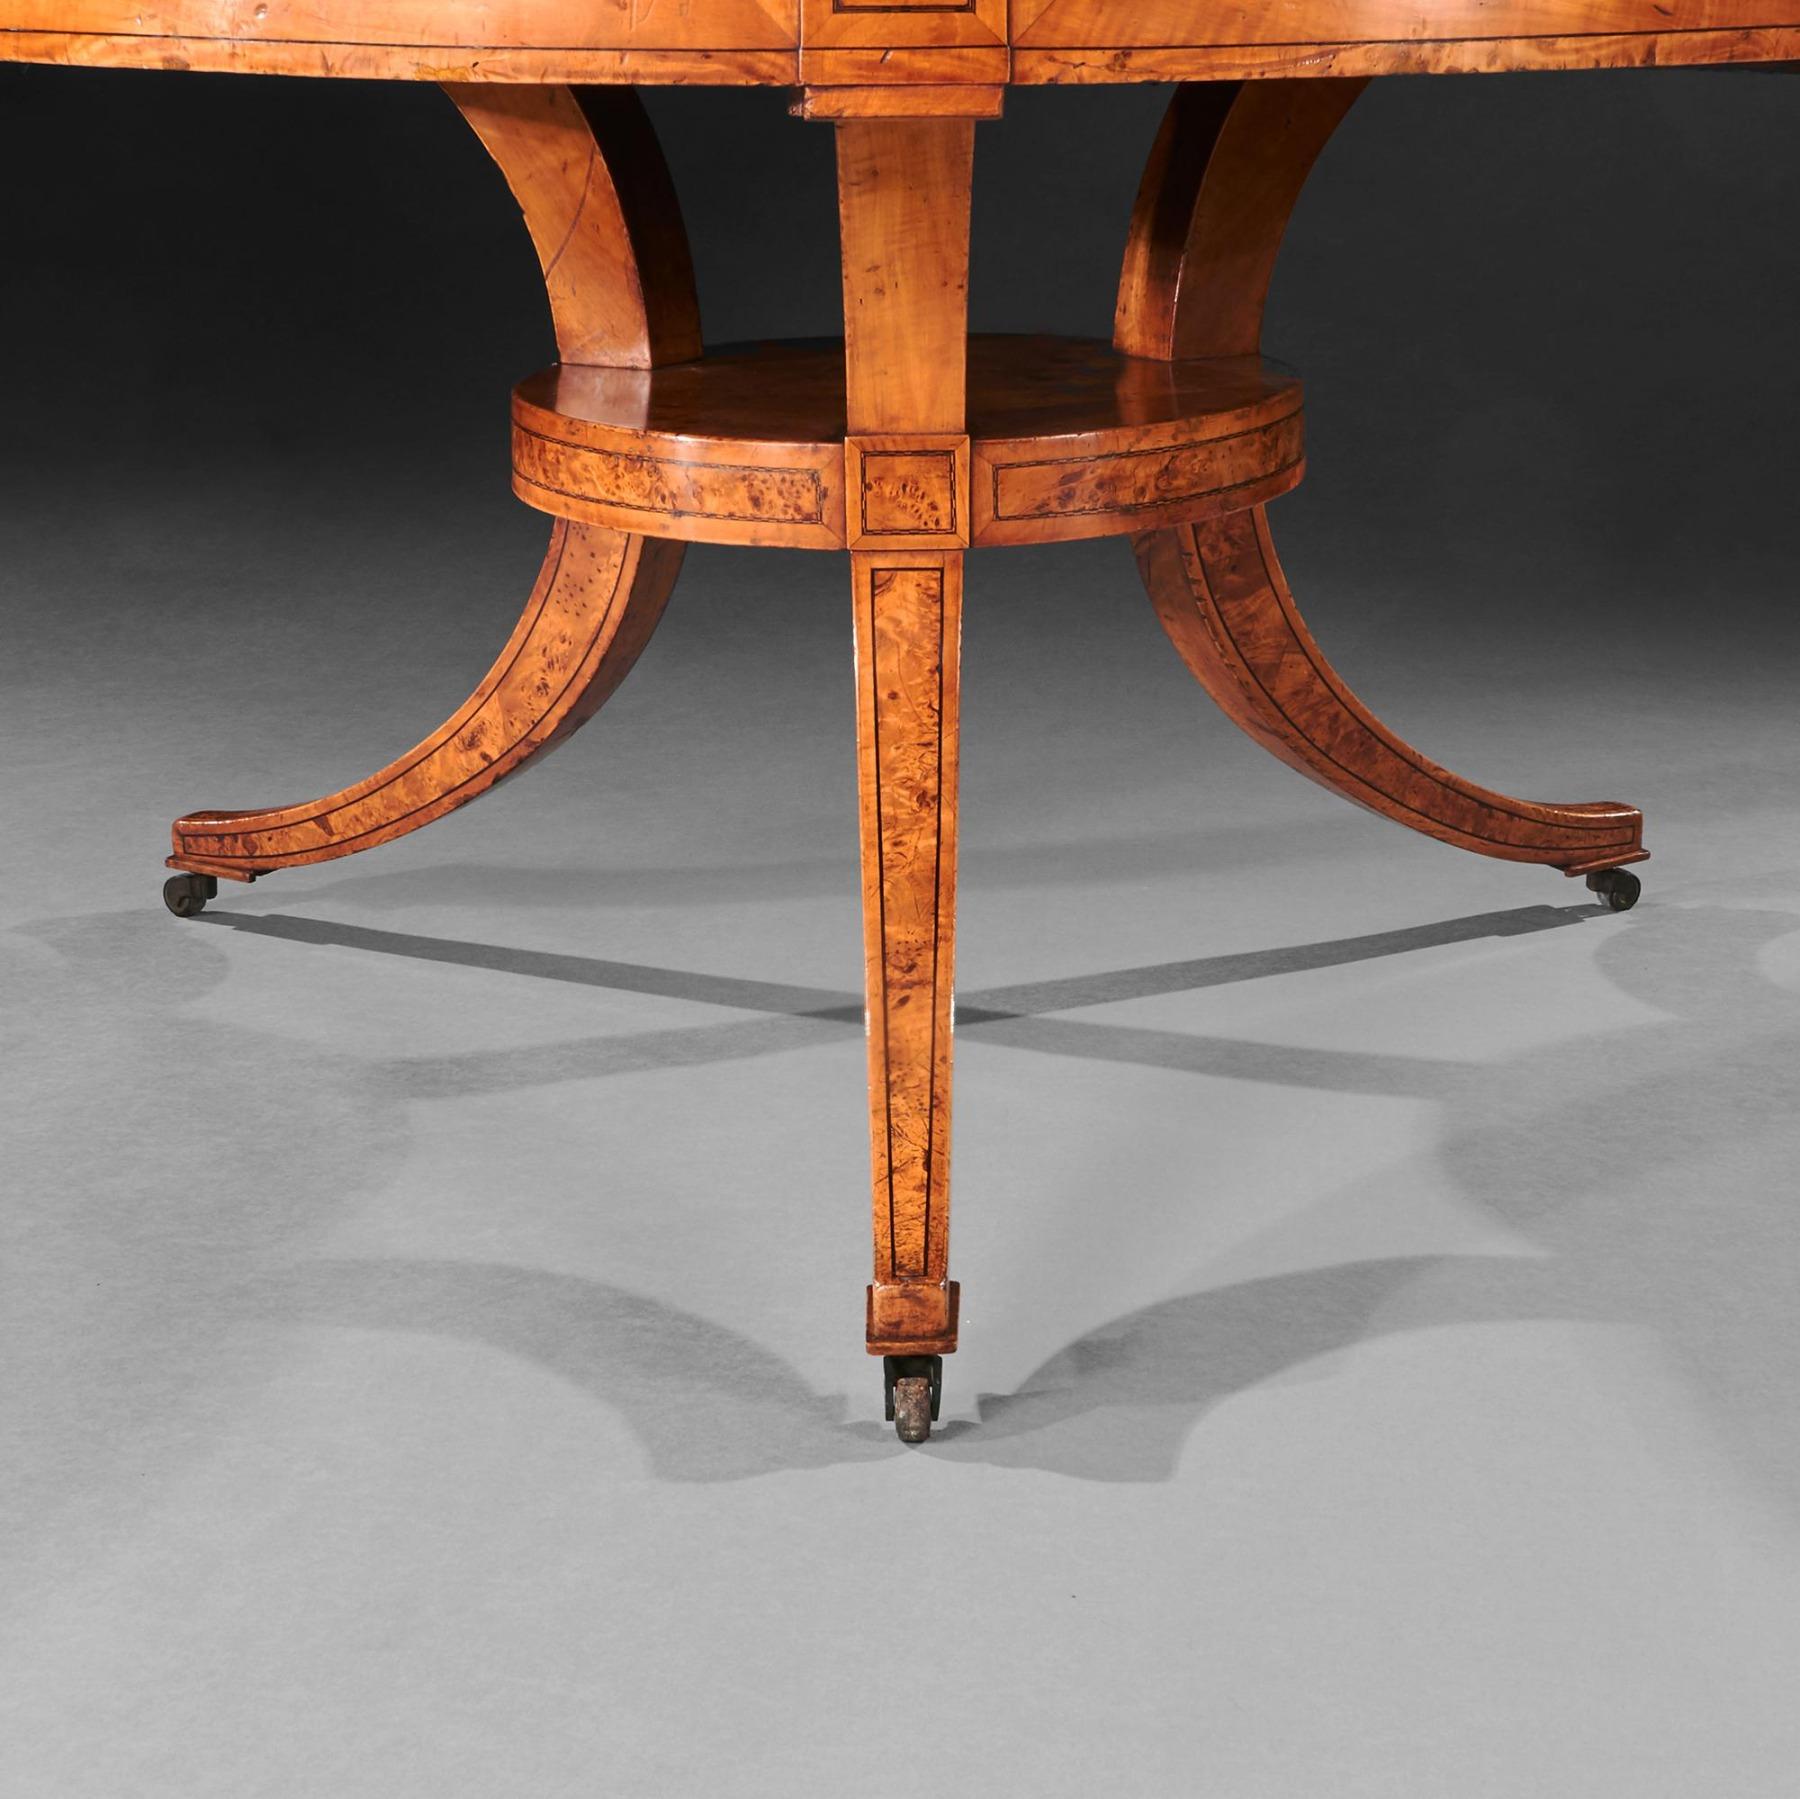 Rare Early 19th Century Scandinavian Burr Root Maple Drum Table For Sale 4